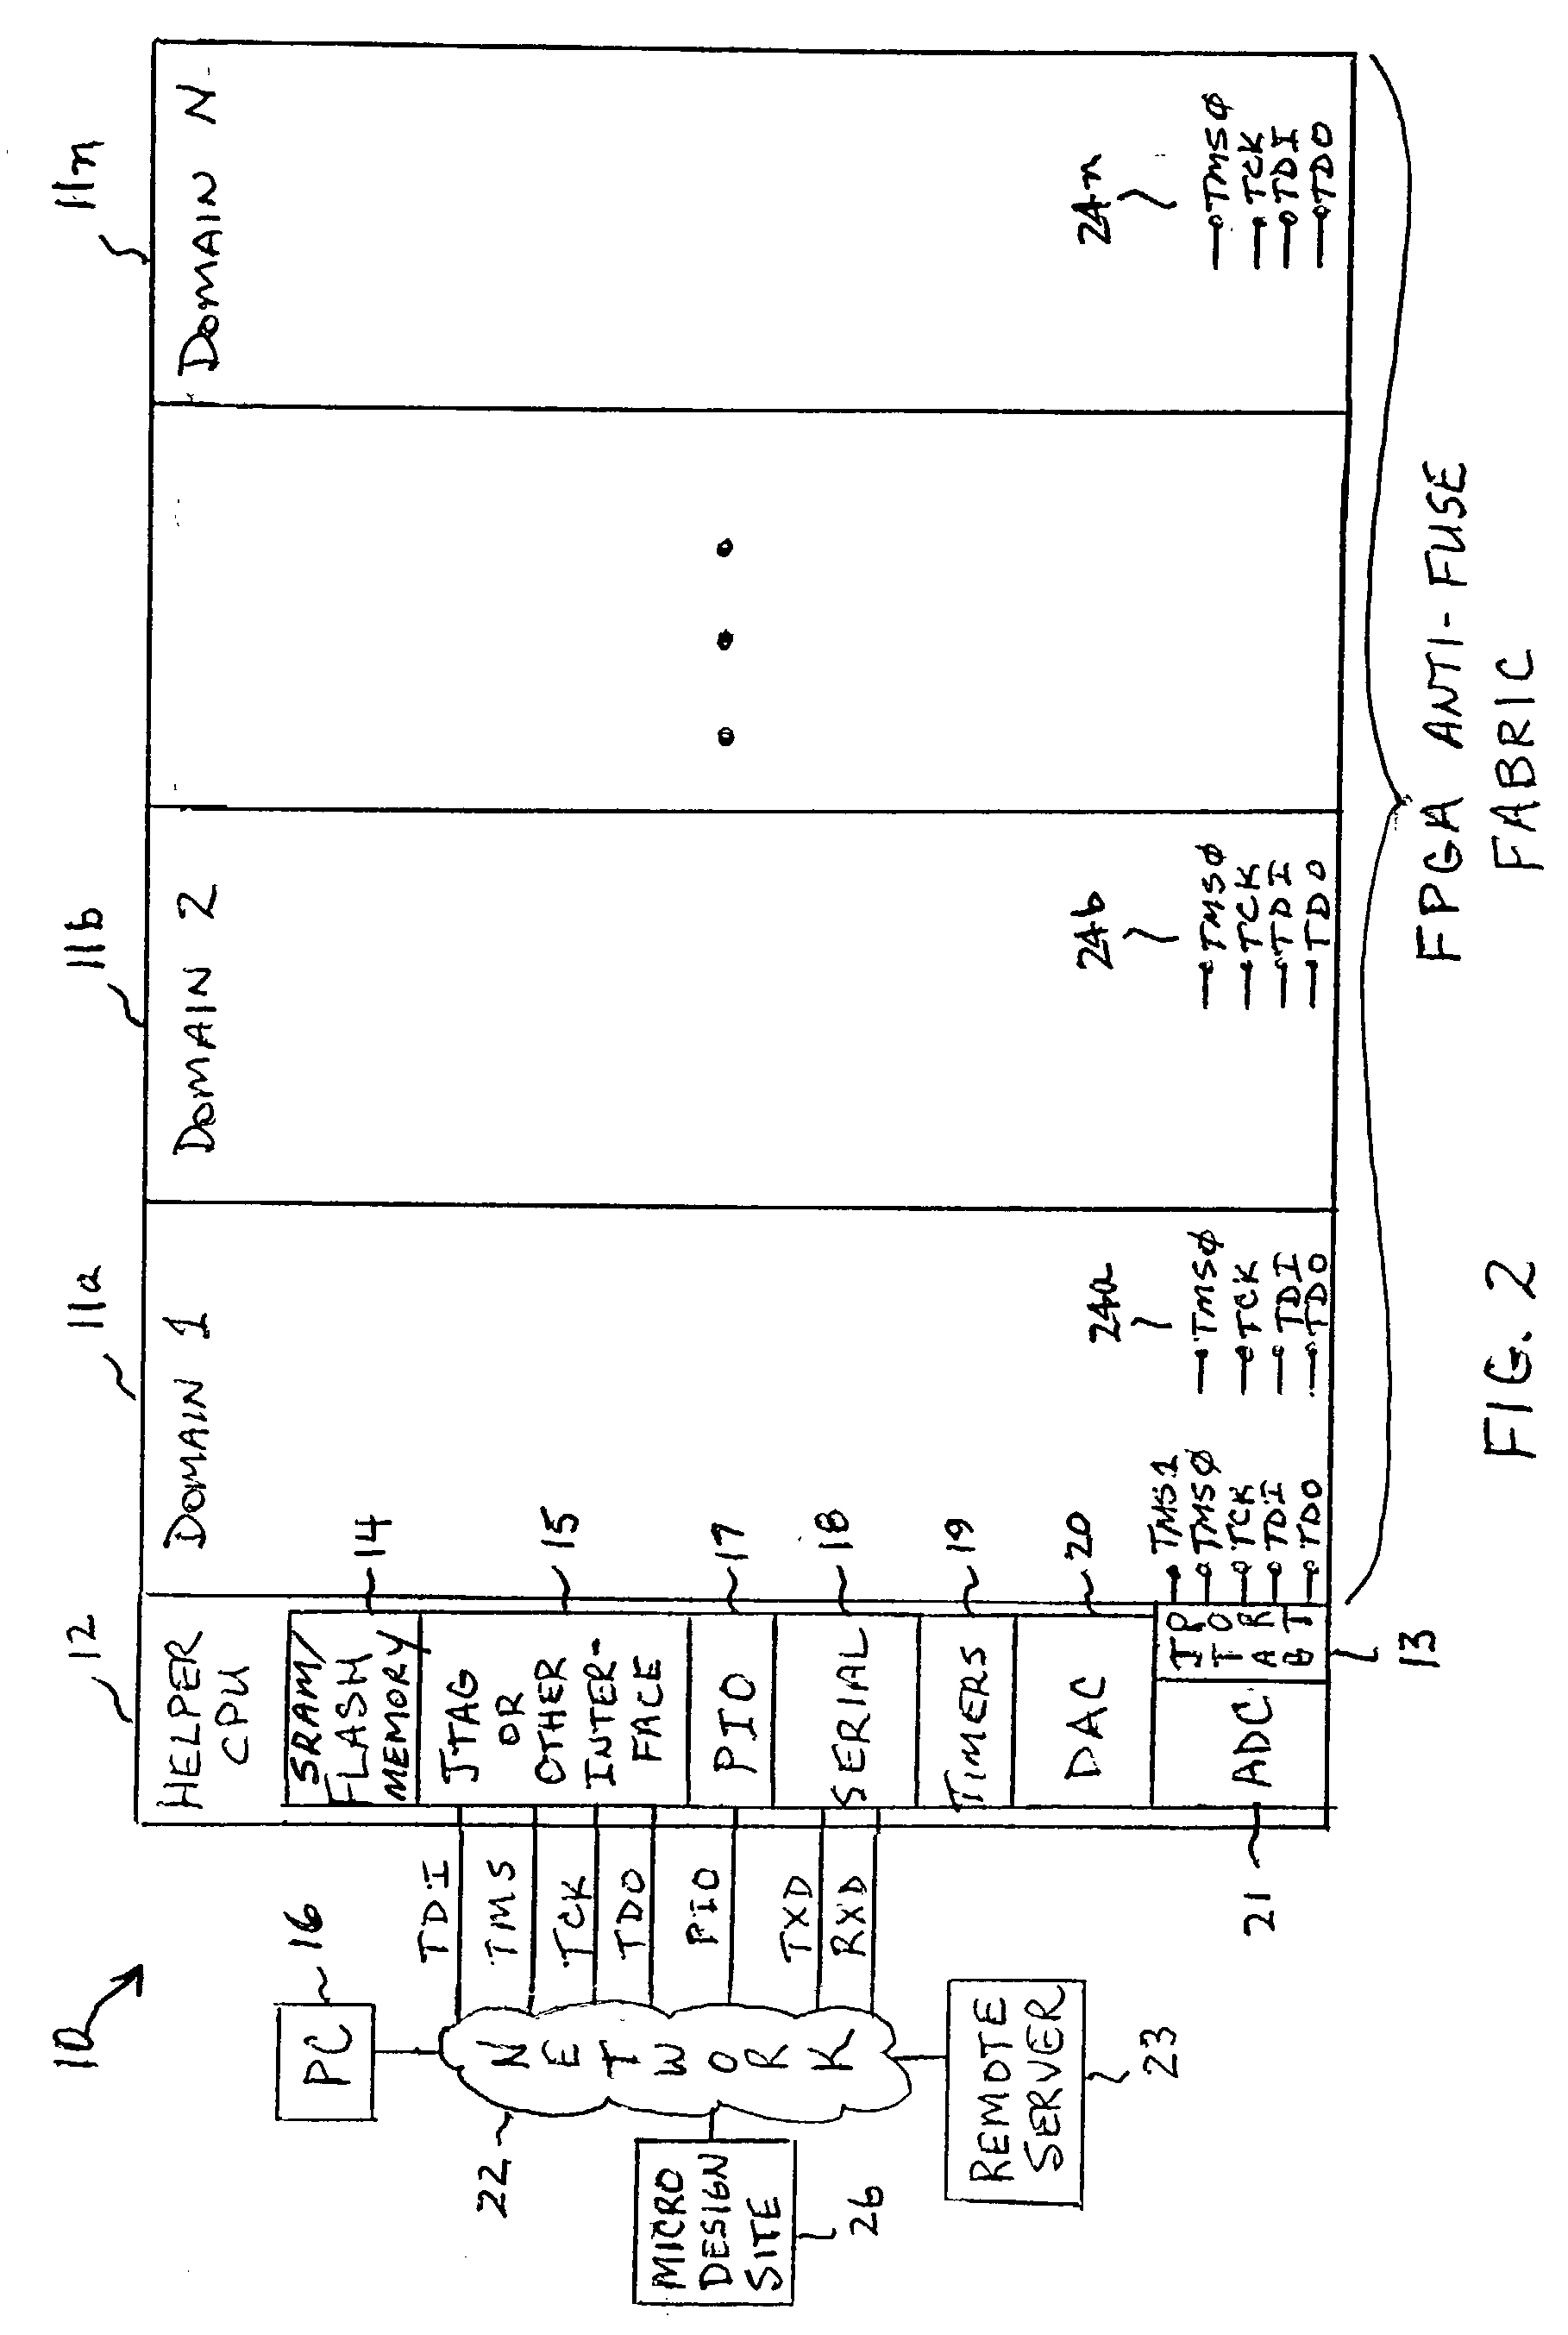 Self-programmable microcomputer and method of remotely programming same